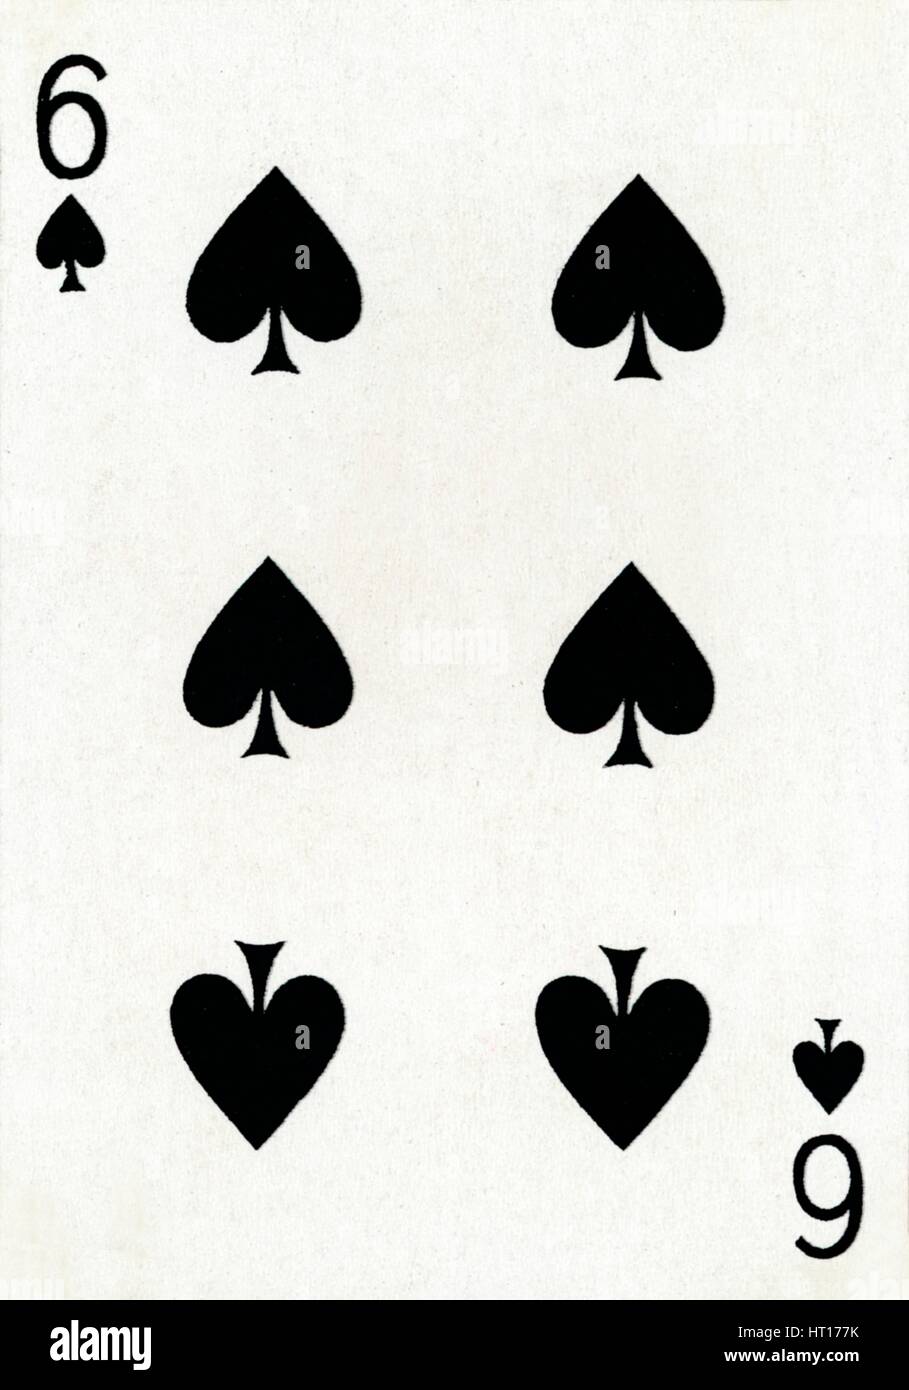 6 of Spades from a deck of Goodall & Son Ltd. playing cards, c1940. Artist: Unknown. Stock Photo